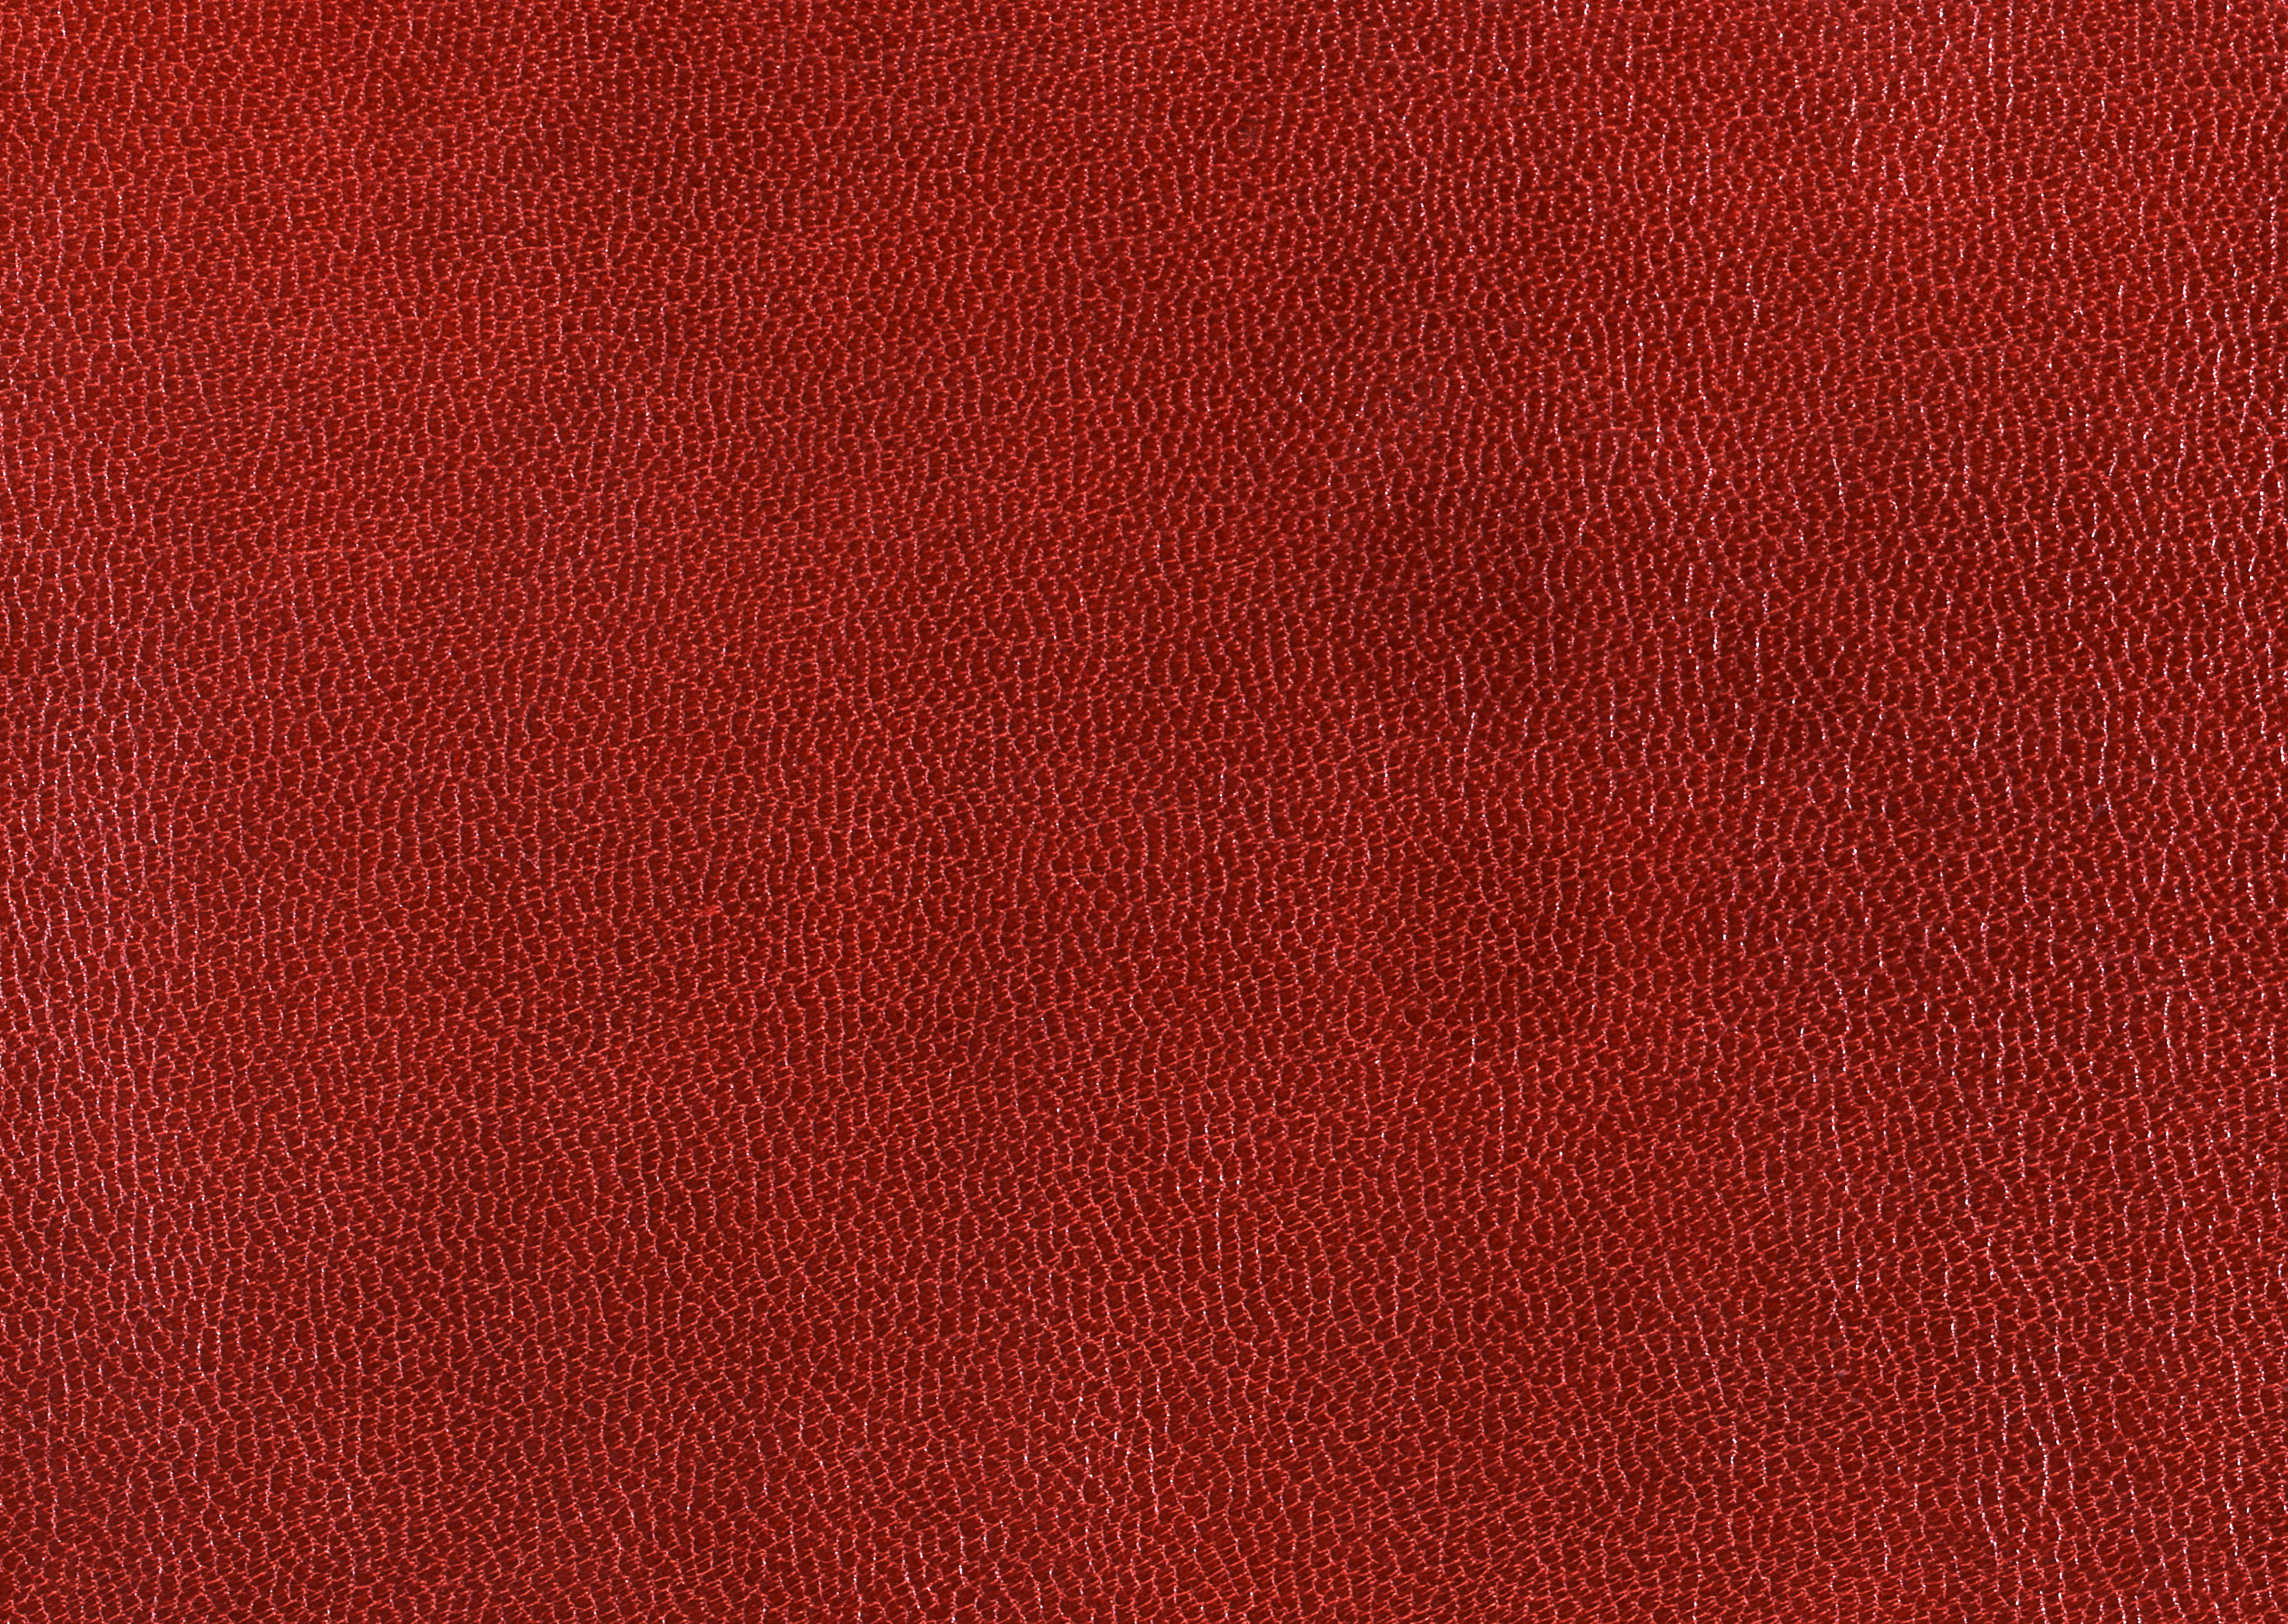 Leather texture background image free download